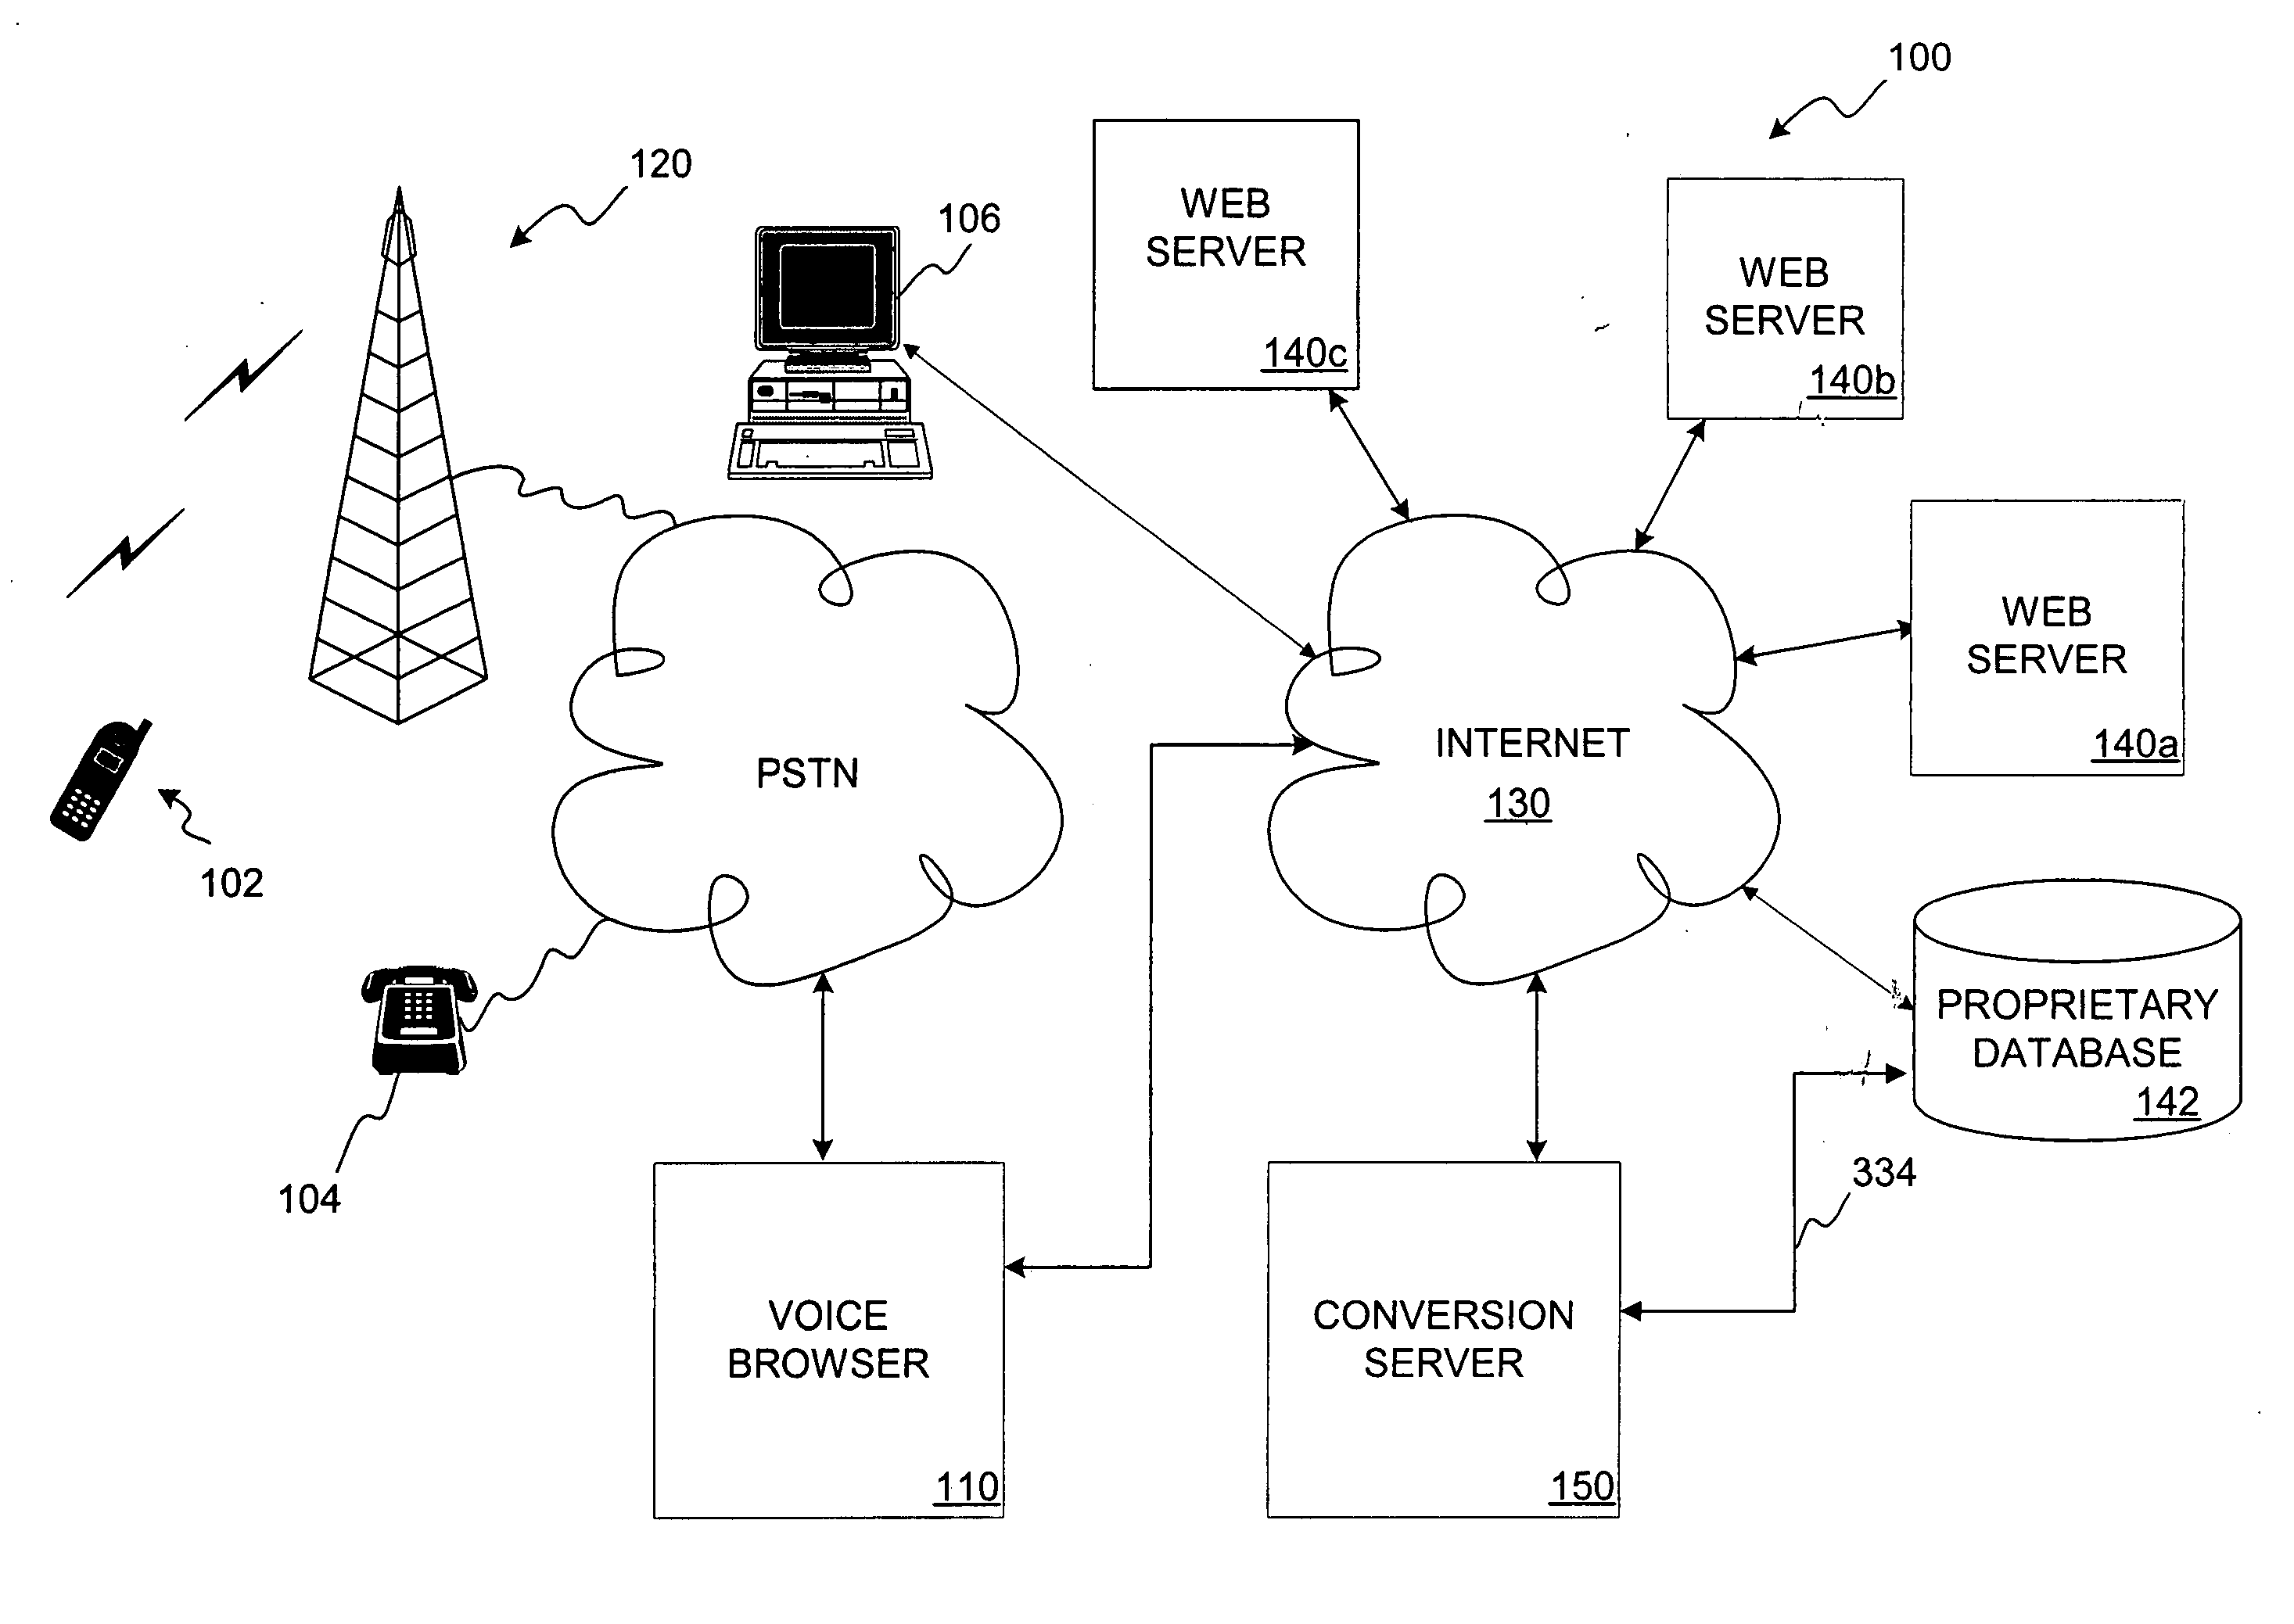 Multi-modal information delivery system